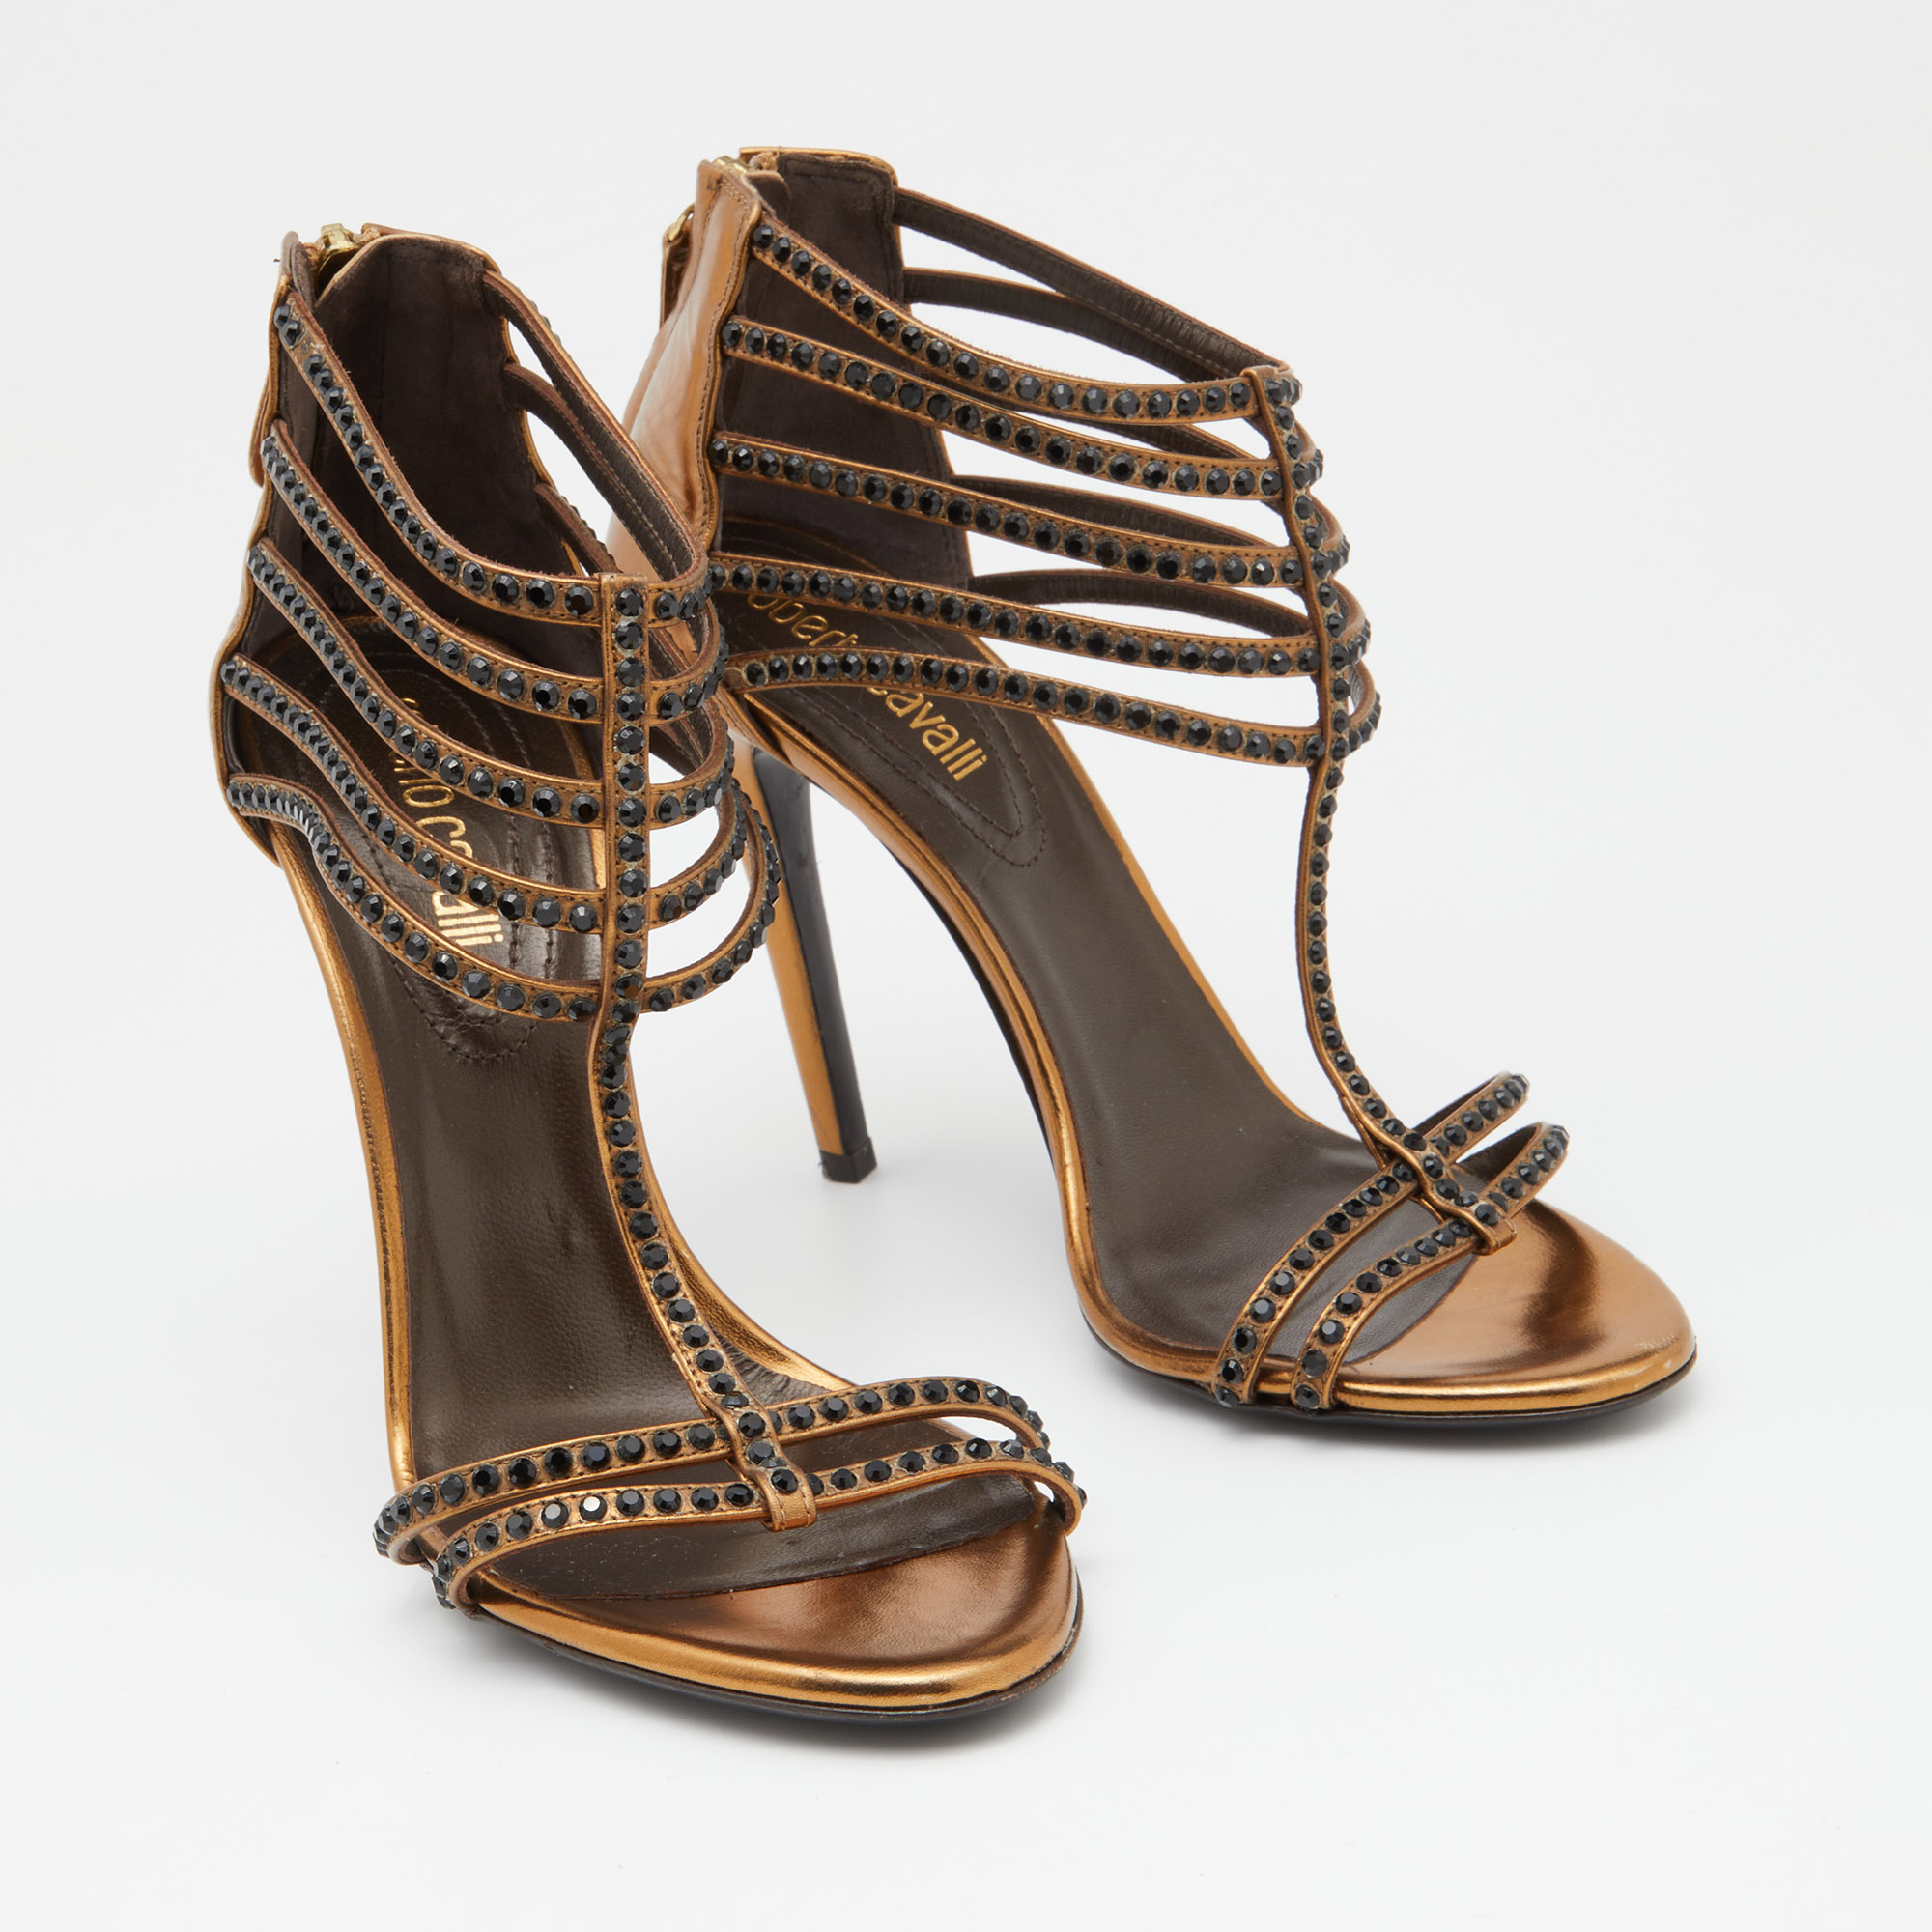 Roberto Cavalli Gold Leather Ankle Strap Sandals Size Size 37